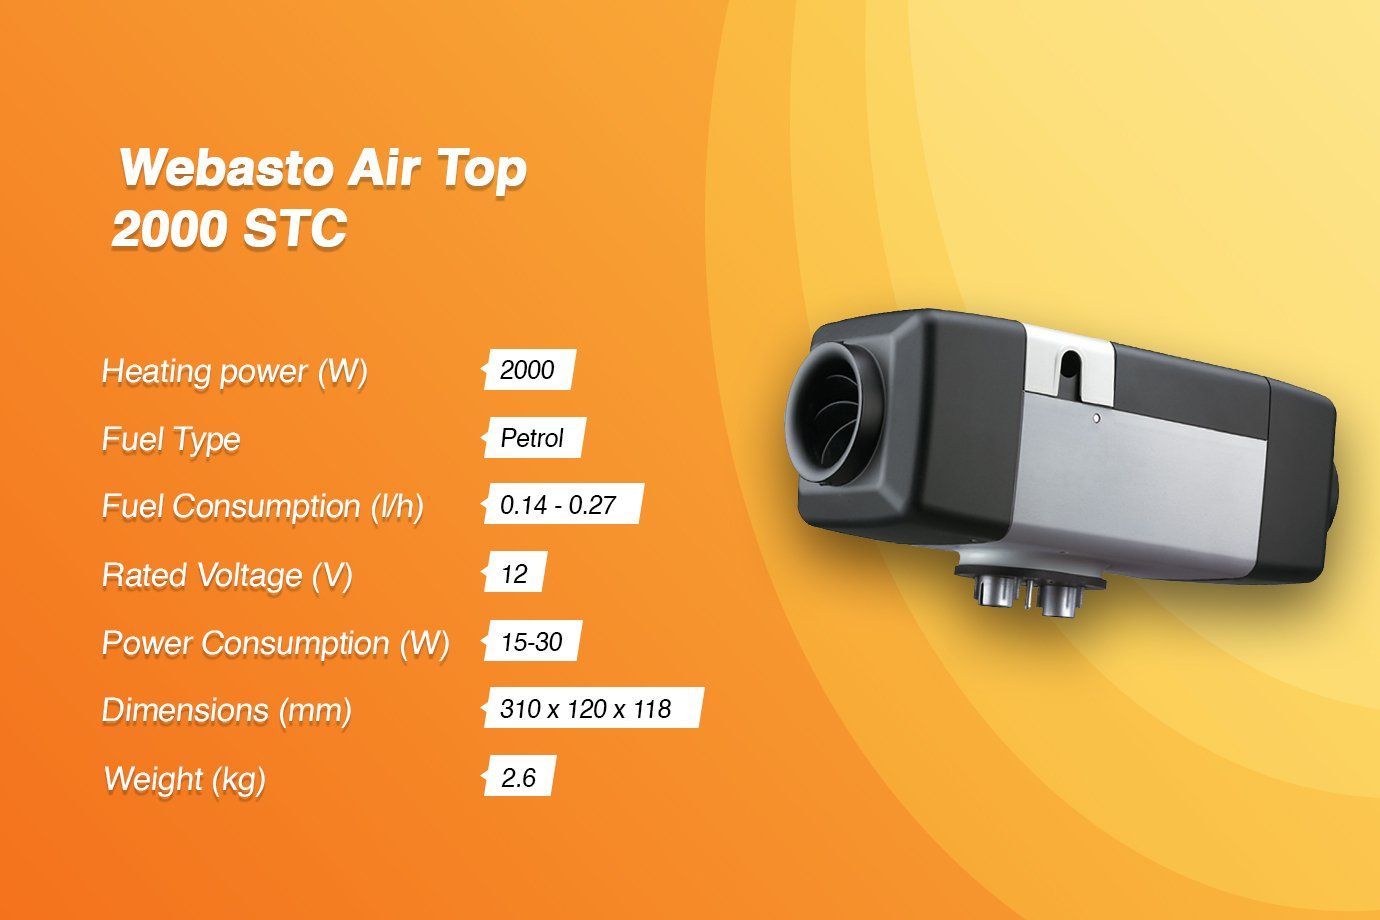 Webasto Air Top 2000 STC Specifications